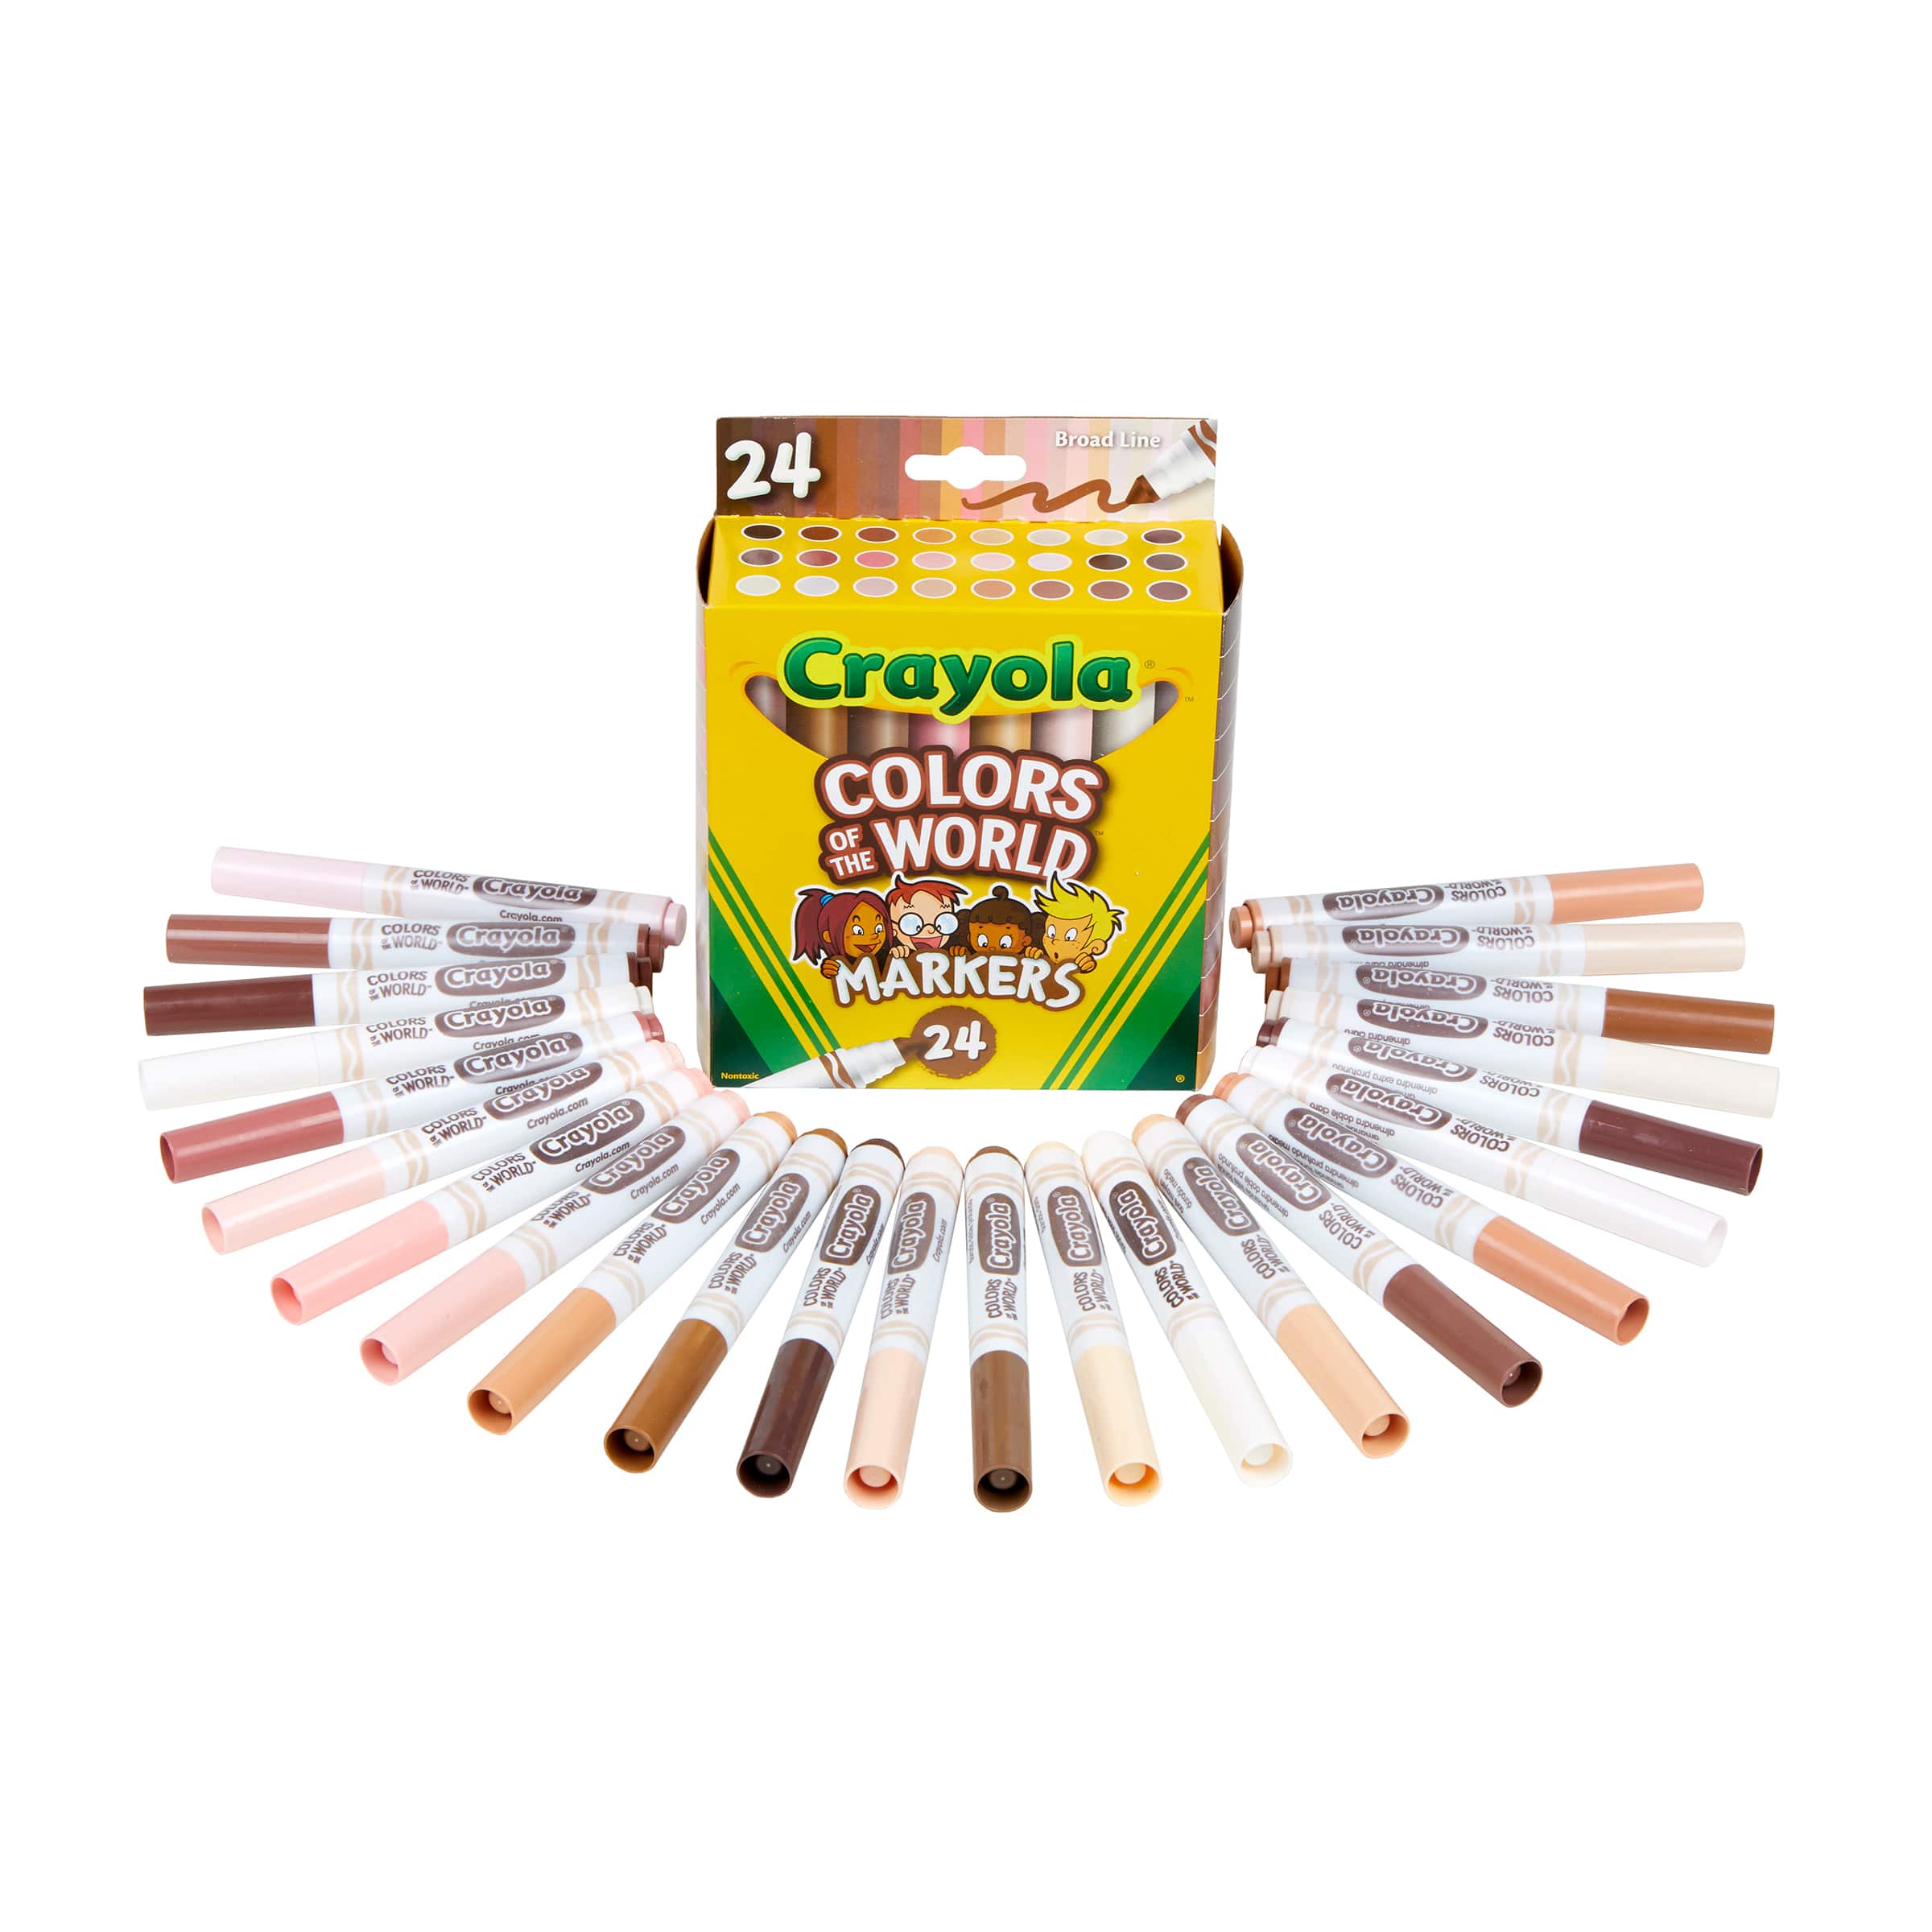 Crayola: Colors of the World Markers (24 pack)